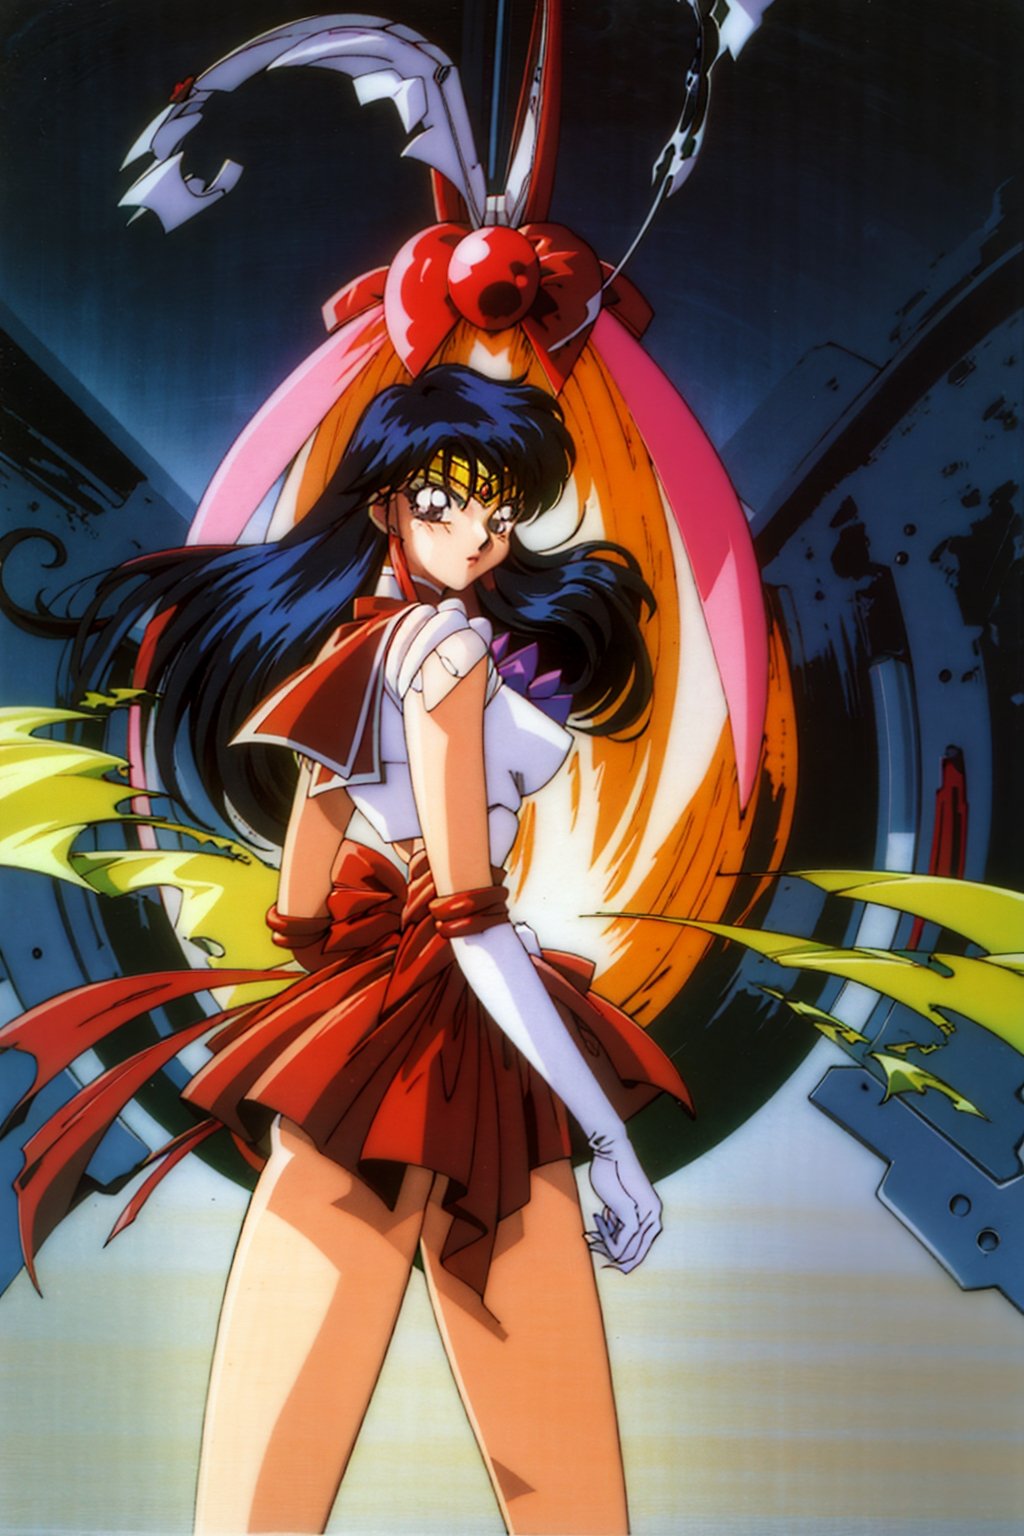 ((Masterpiece in UHD, with crisp details. Style inspired by 90s anime art by Masami Obari)). | outfit1 sama1, tiara, sailor senshi uniform, white gloves, red sailor collar, red skirt, star choker, elbow gloves, pleated skirt, bare legs, purple bow, (((full-body portrait))), (((perfect_pose, perfect_anatomy, perfect_body))), ((better_hands, perfect_fingers, perfect_hands):0.5), (((perfect_composition, perfect_design, perfect_layout, perfect_detail, ultra_detailed))), (((enhance_all, fix_everything))), More Detail, Enhance.,retro artstyle, 1990s (style),90s,80s,00s,anime,retro,retro anime,sama1